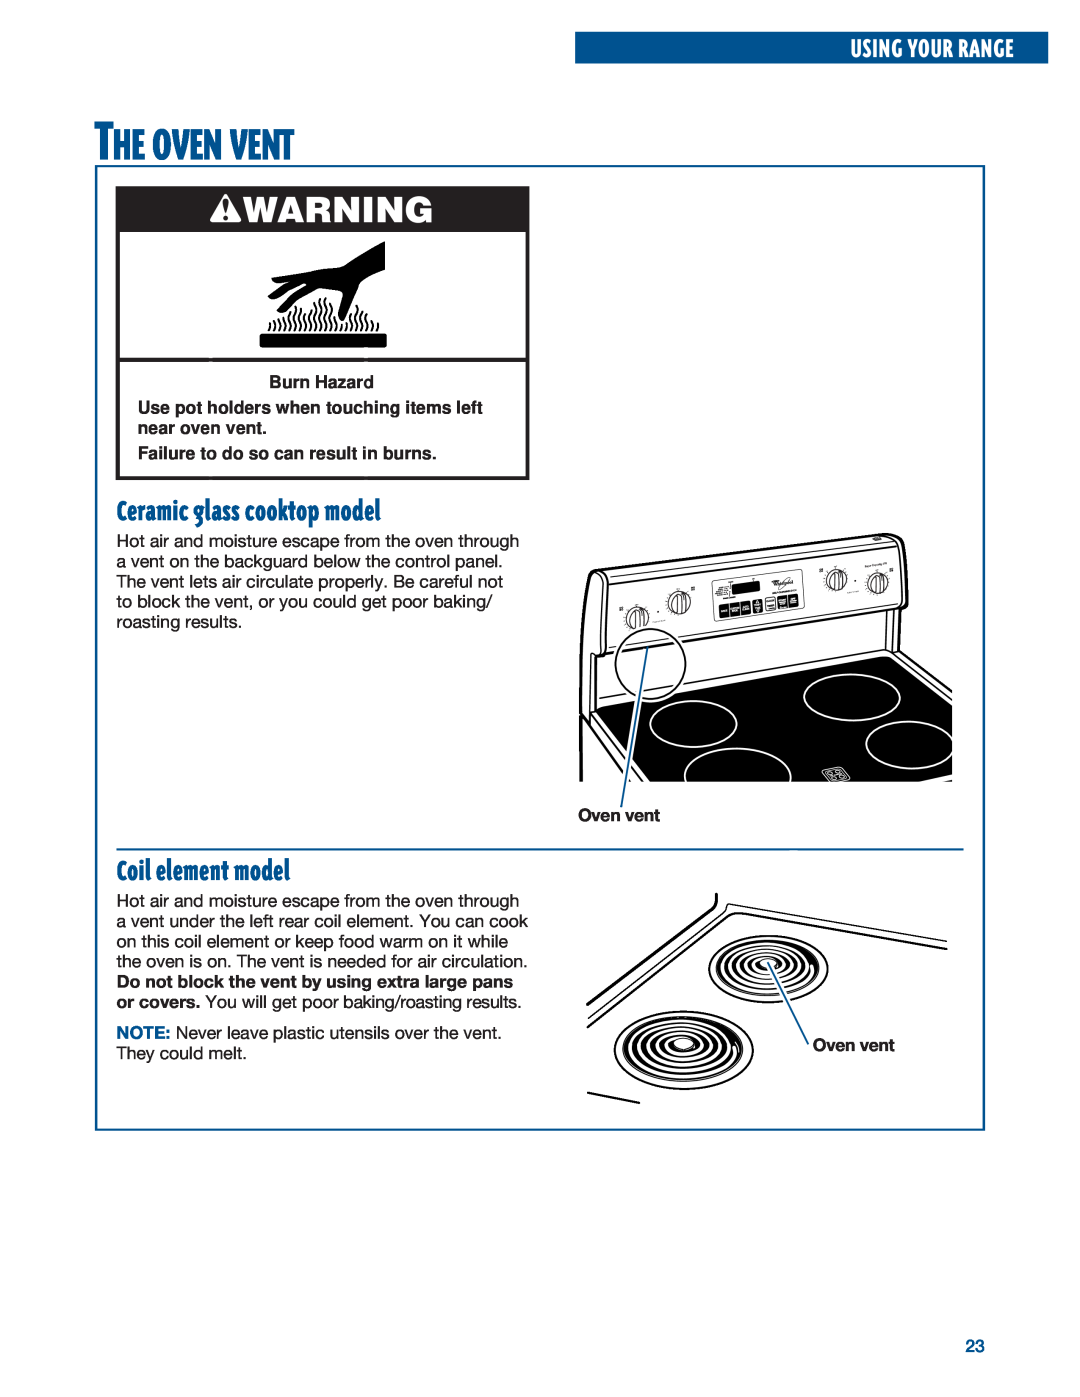 Whirlpool RF376PXE The Oven Vent, Ceramic glass cooktop model, Coil element model, Failure to do so can result in burns 